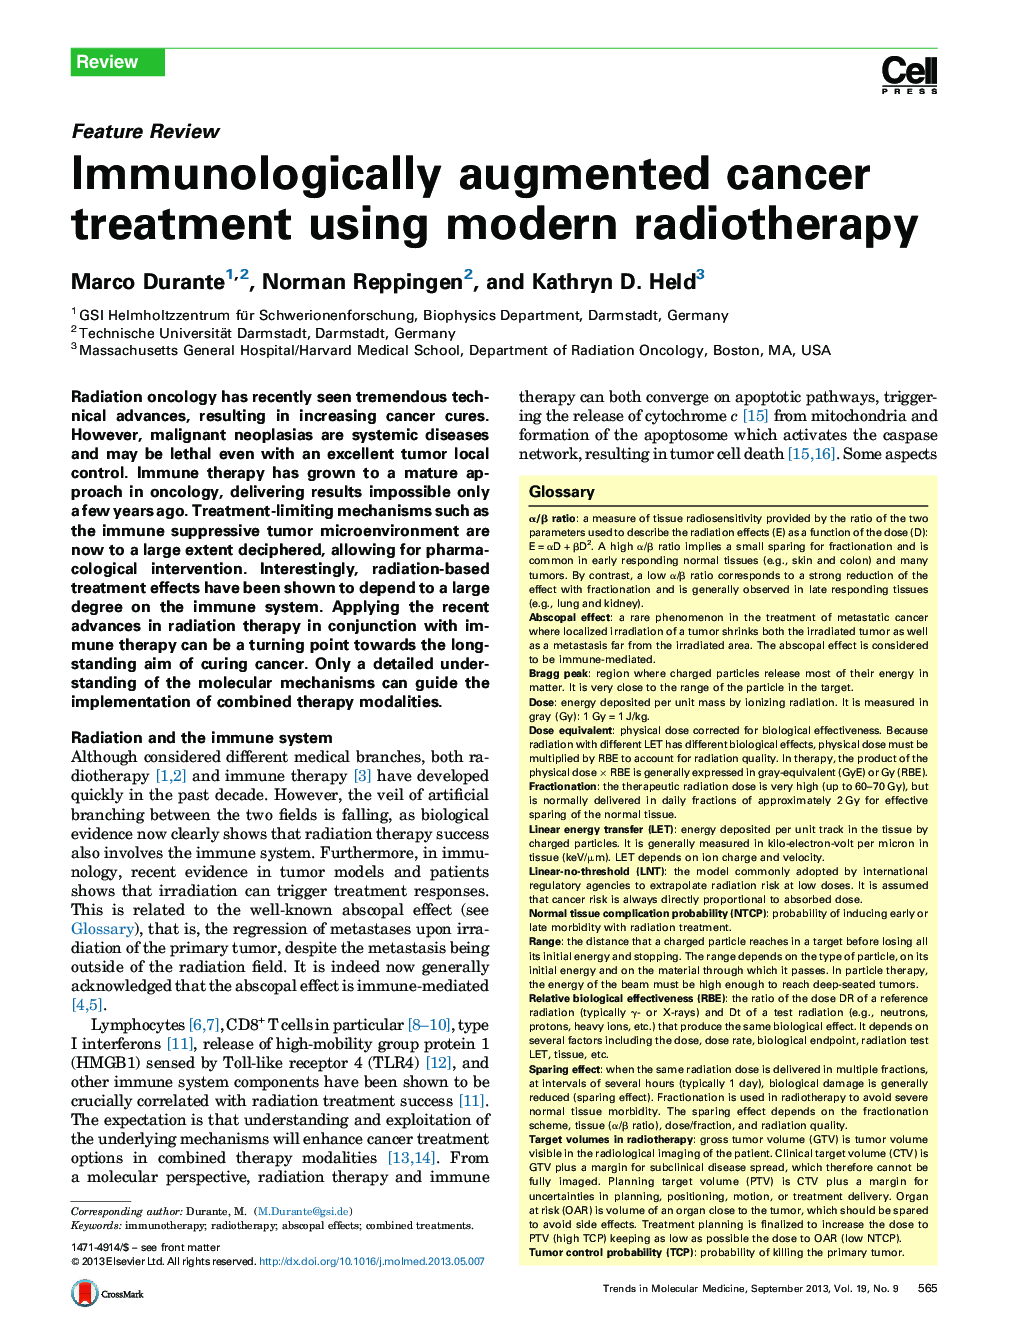 Immunologically augmented cancer treatment using modern radiotherapy